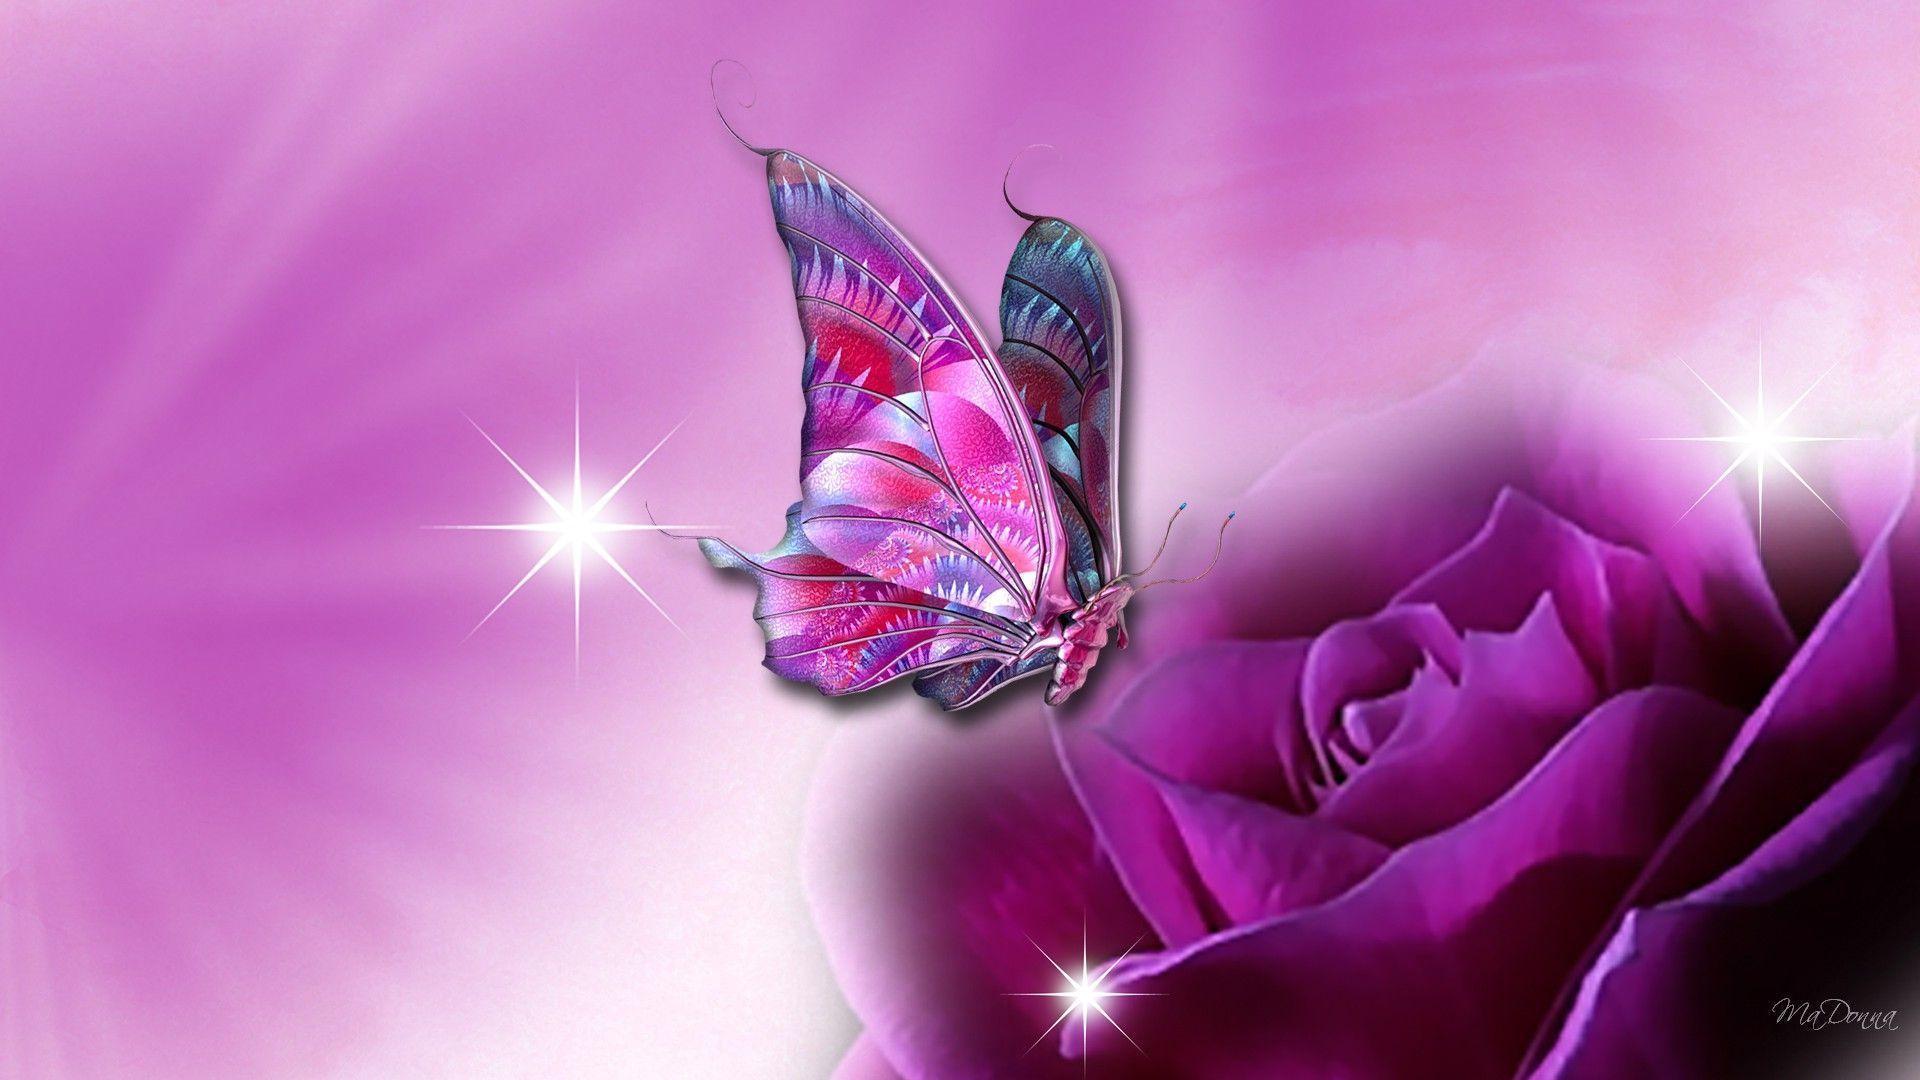 Download Awesome Butterfly For Laptop Wallpaper. Full HD Wallpaper